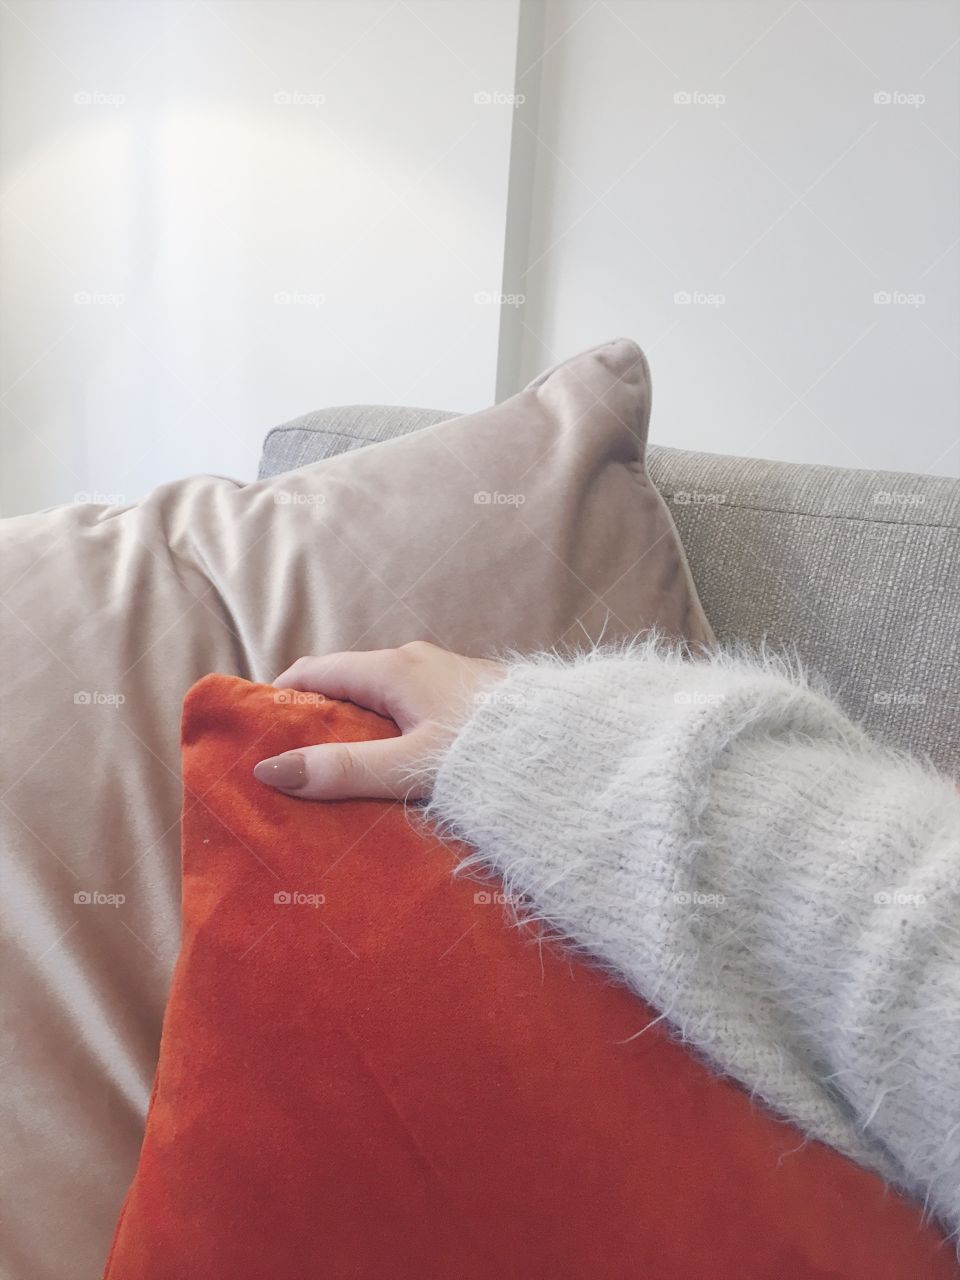 Female with pink nails holding an orange terracotta cushion on a couch